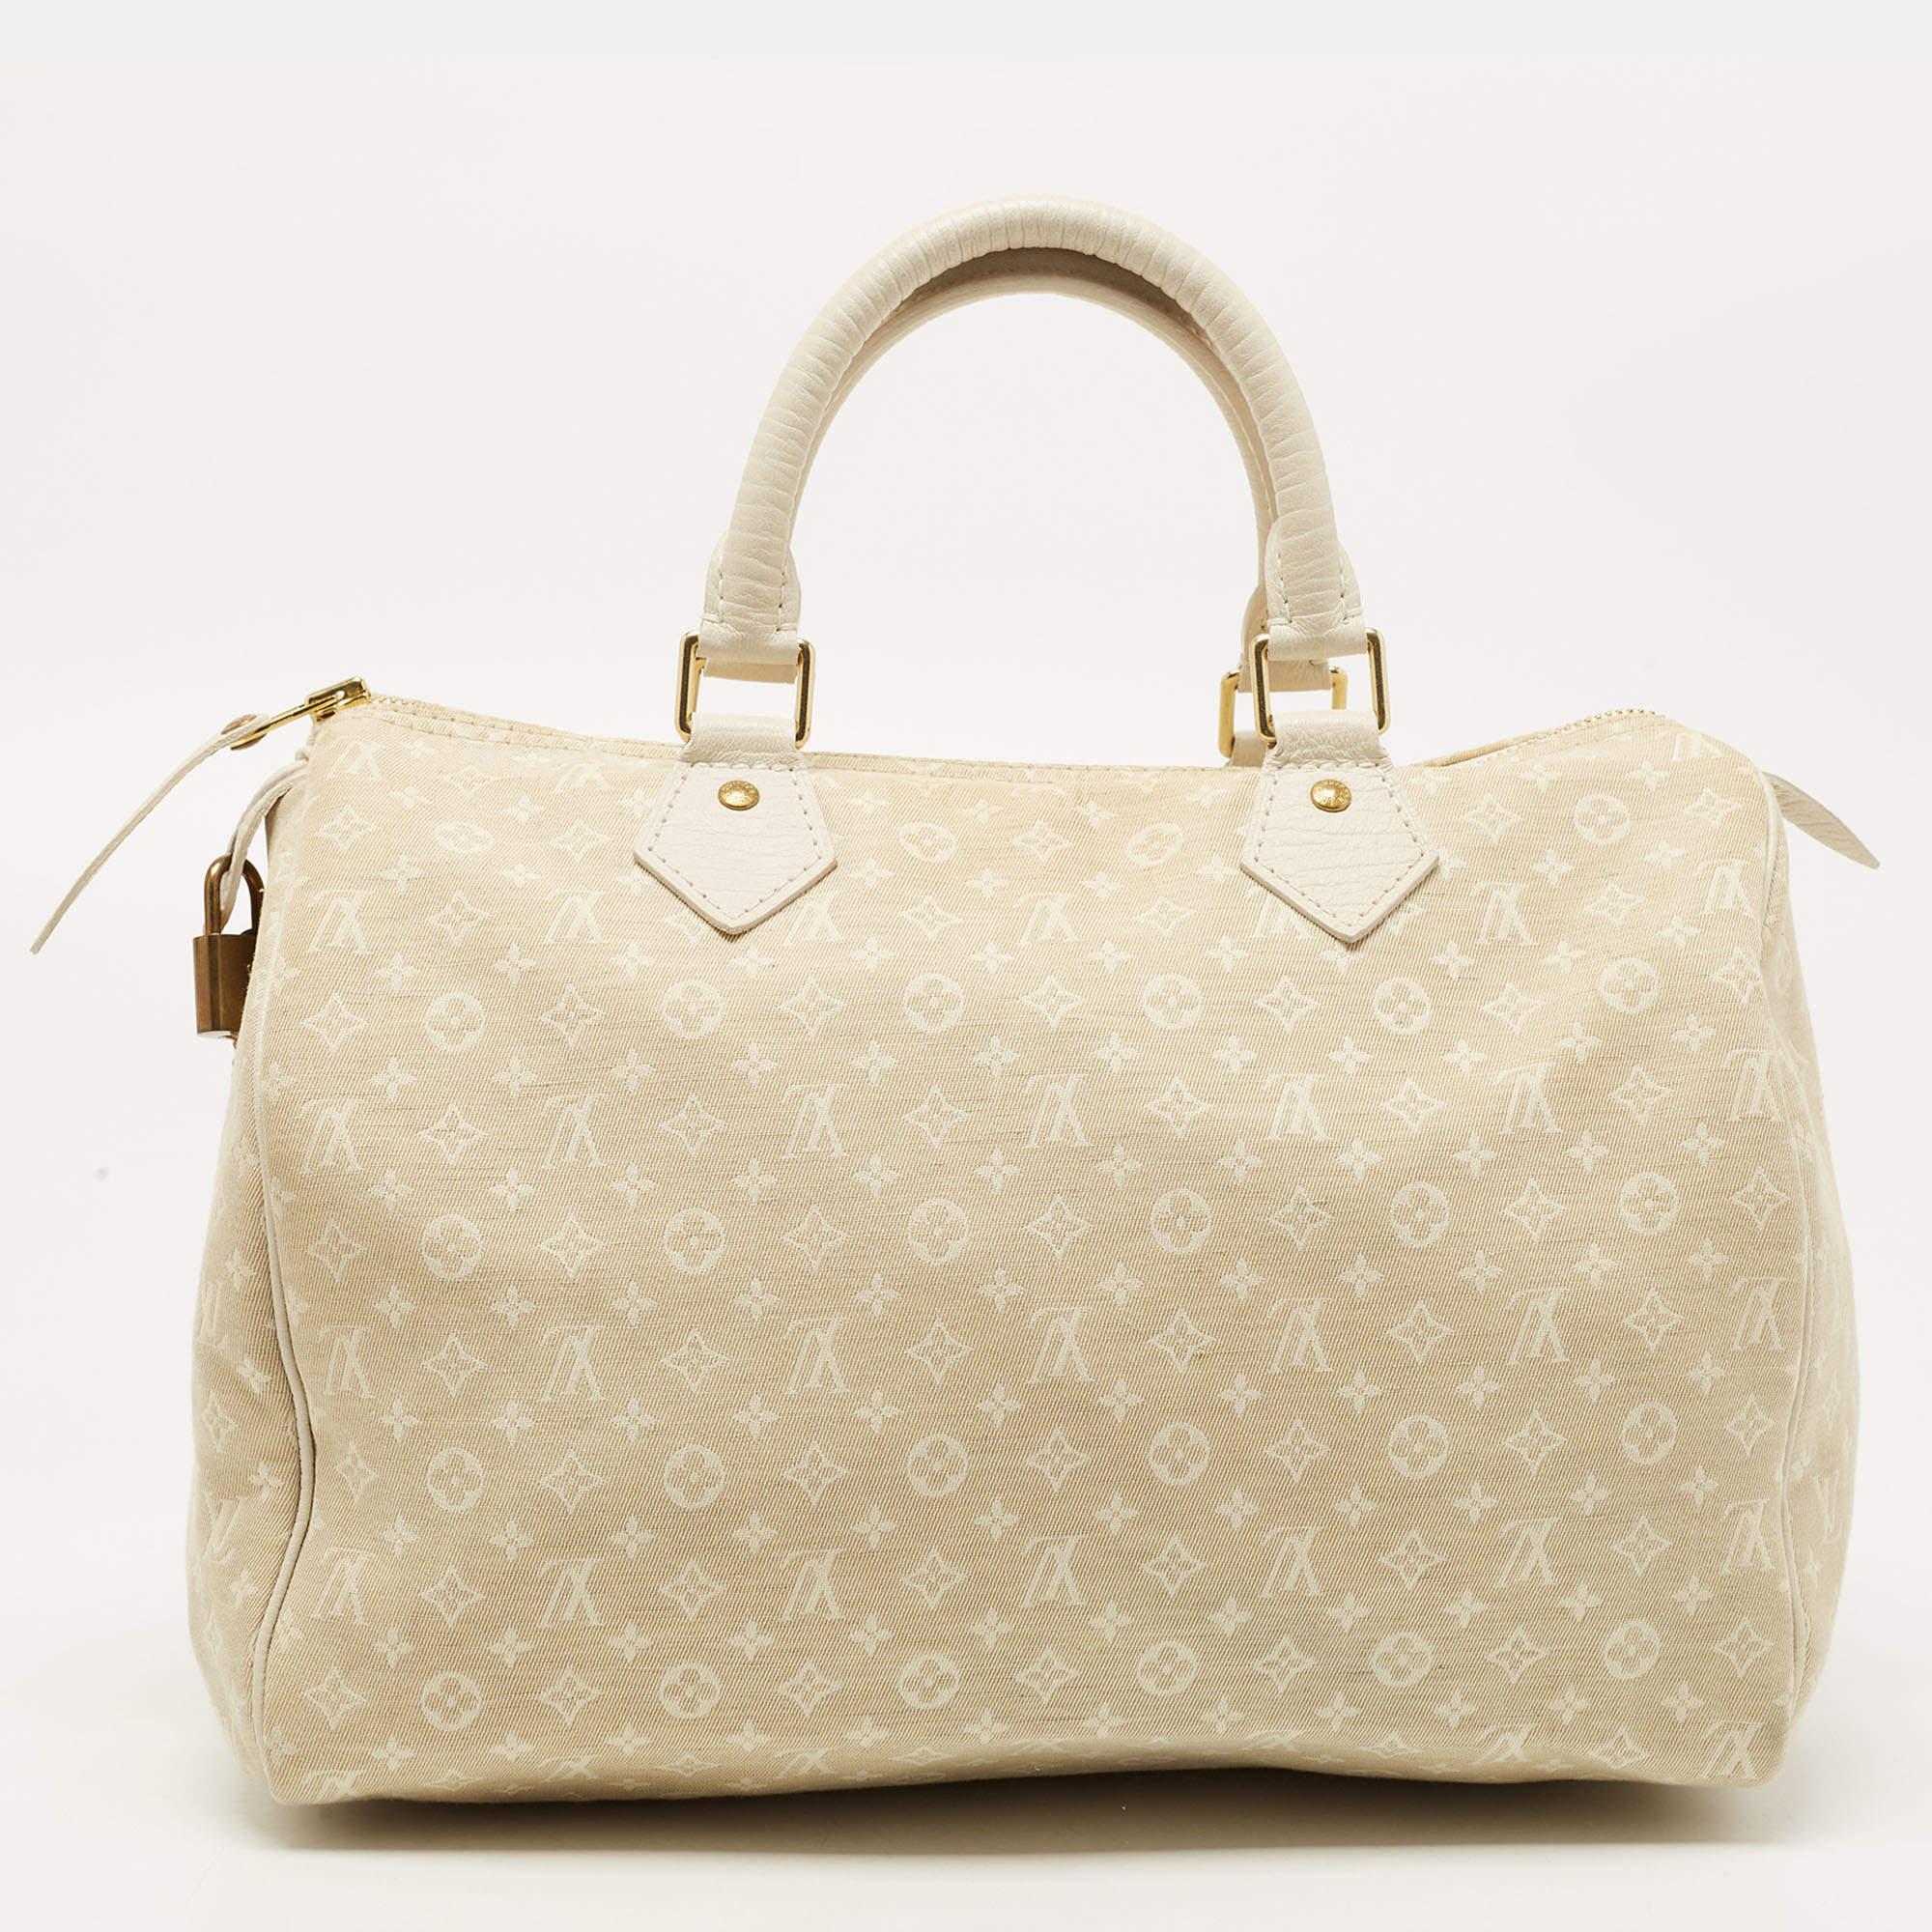 Titled as one of the greatest handbags in the history of luxury fashion, the Speedy from Louis Vuitton was first created for everyday use as a smaller version of their famous Keepall bag. This Speedy 30 comes in Mini Lin Monogram canvas with leather